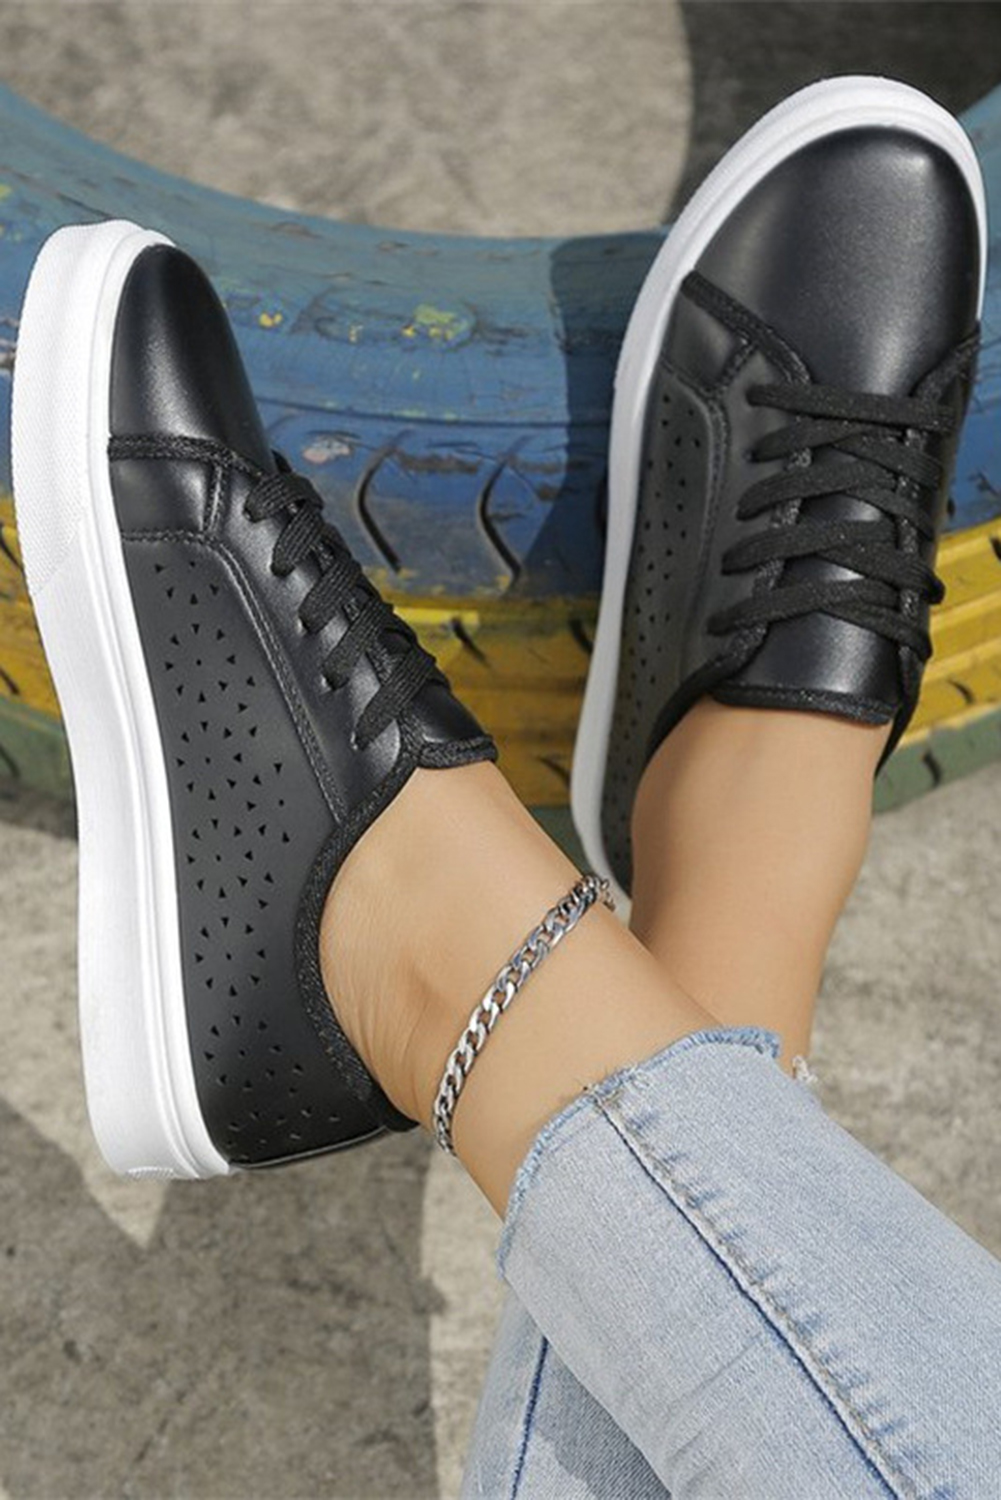 Shewin Wholesale Apparel Distributor Black Lace Up Laser Cut PU Leather SNEAKERS